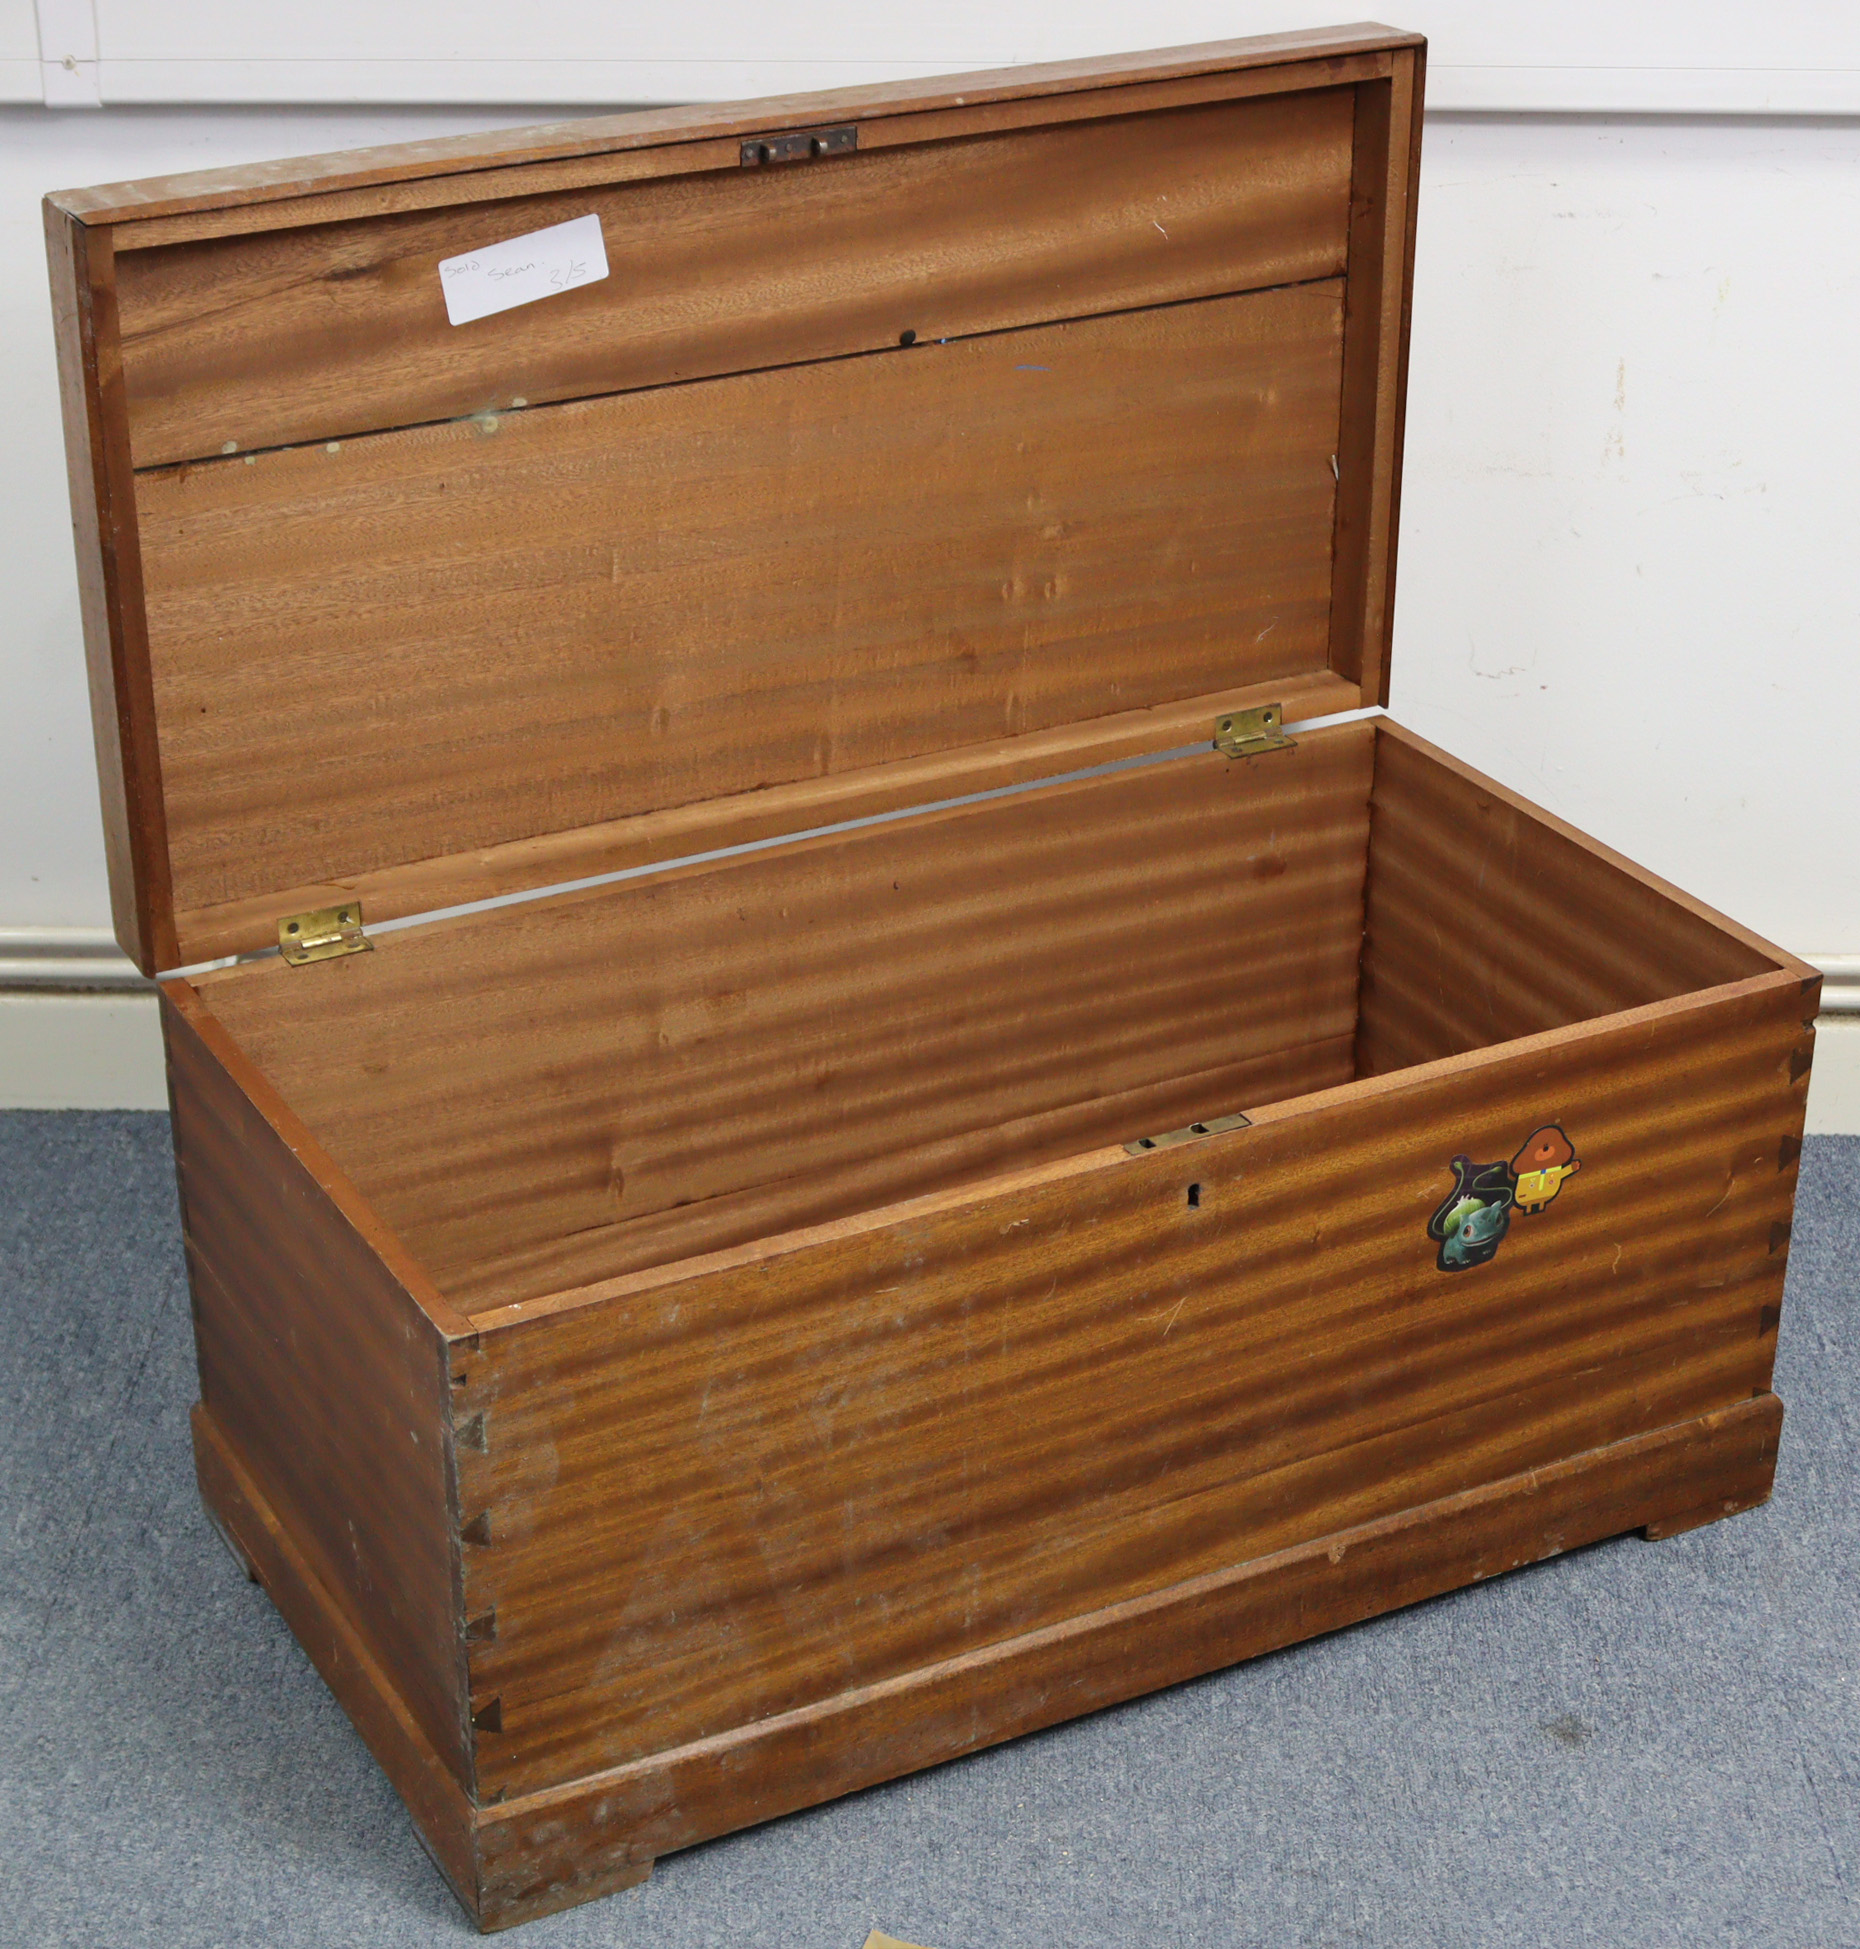 A mahogany storage trunk with hinged lift lid & on block feet, 33½” wide x 16¼” high.